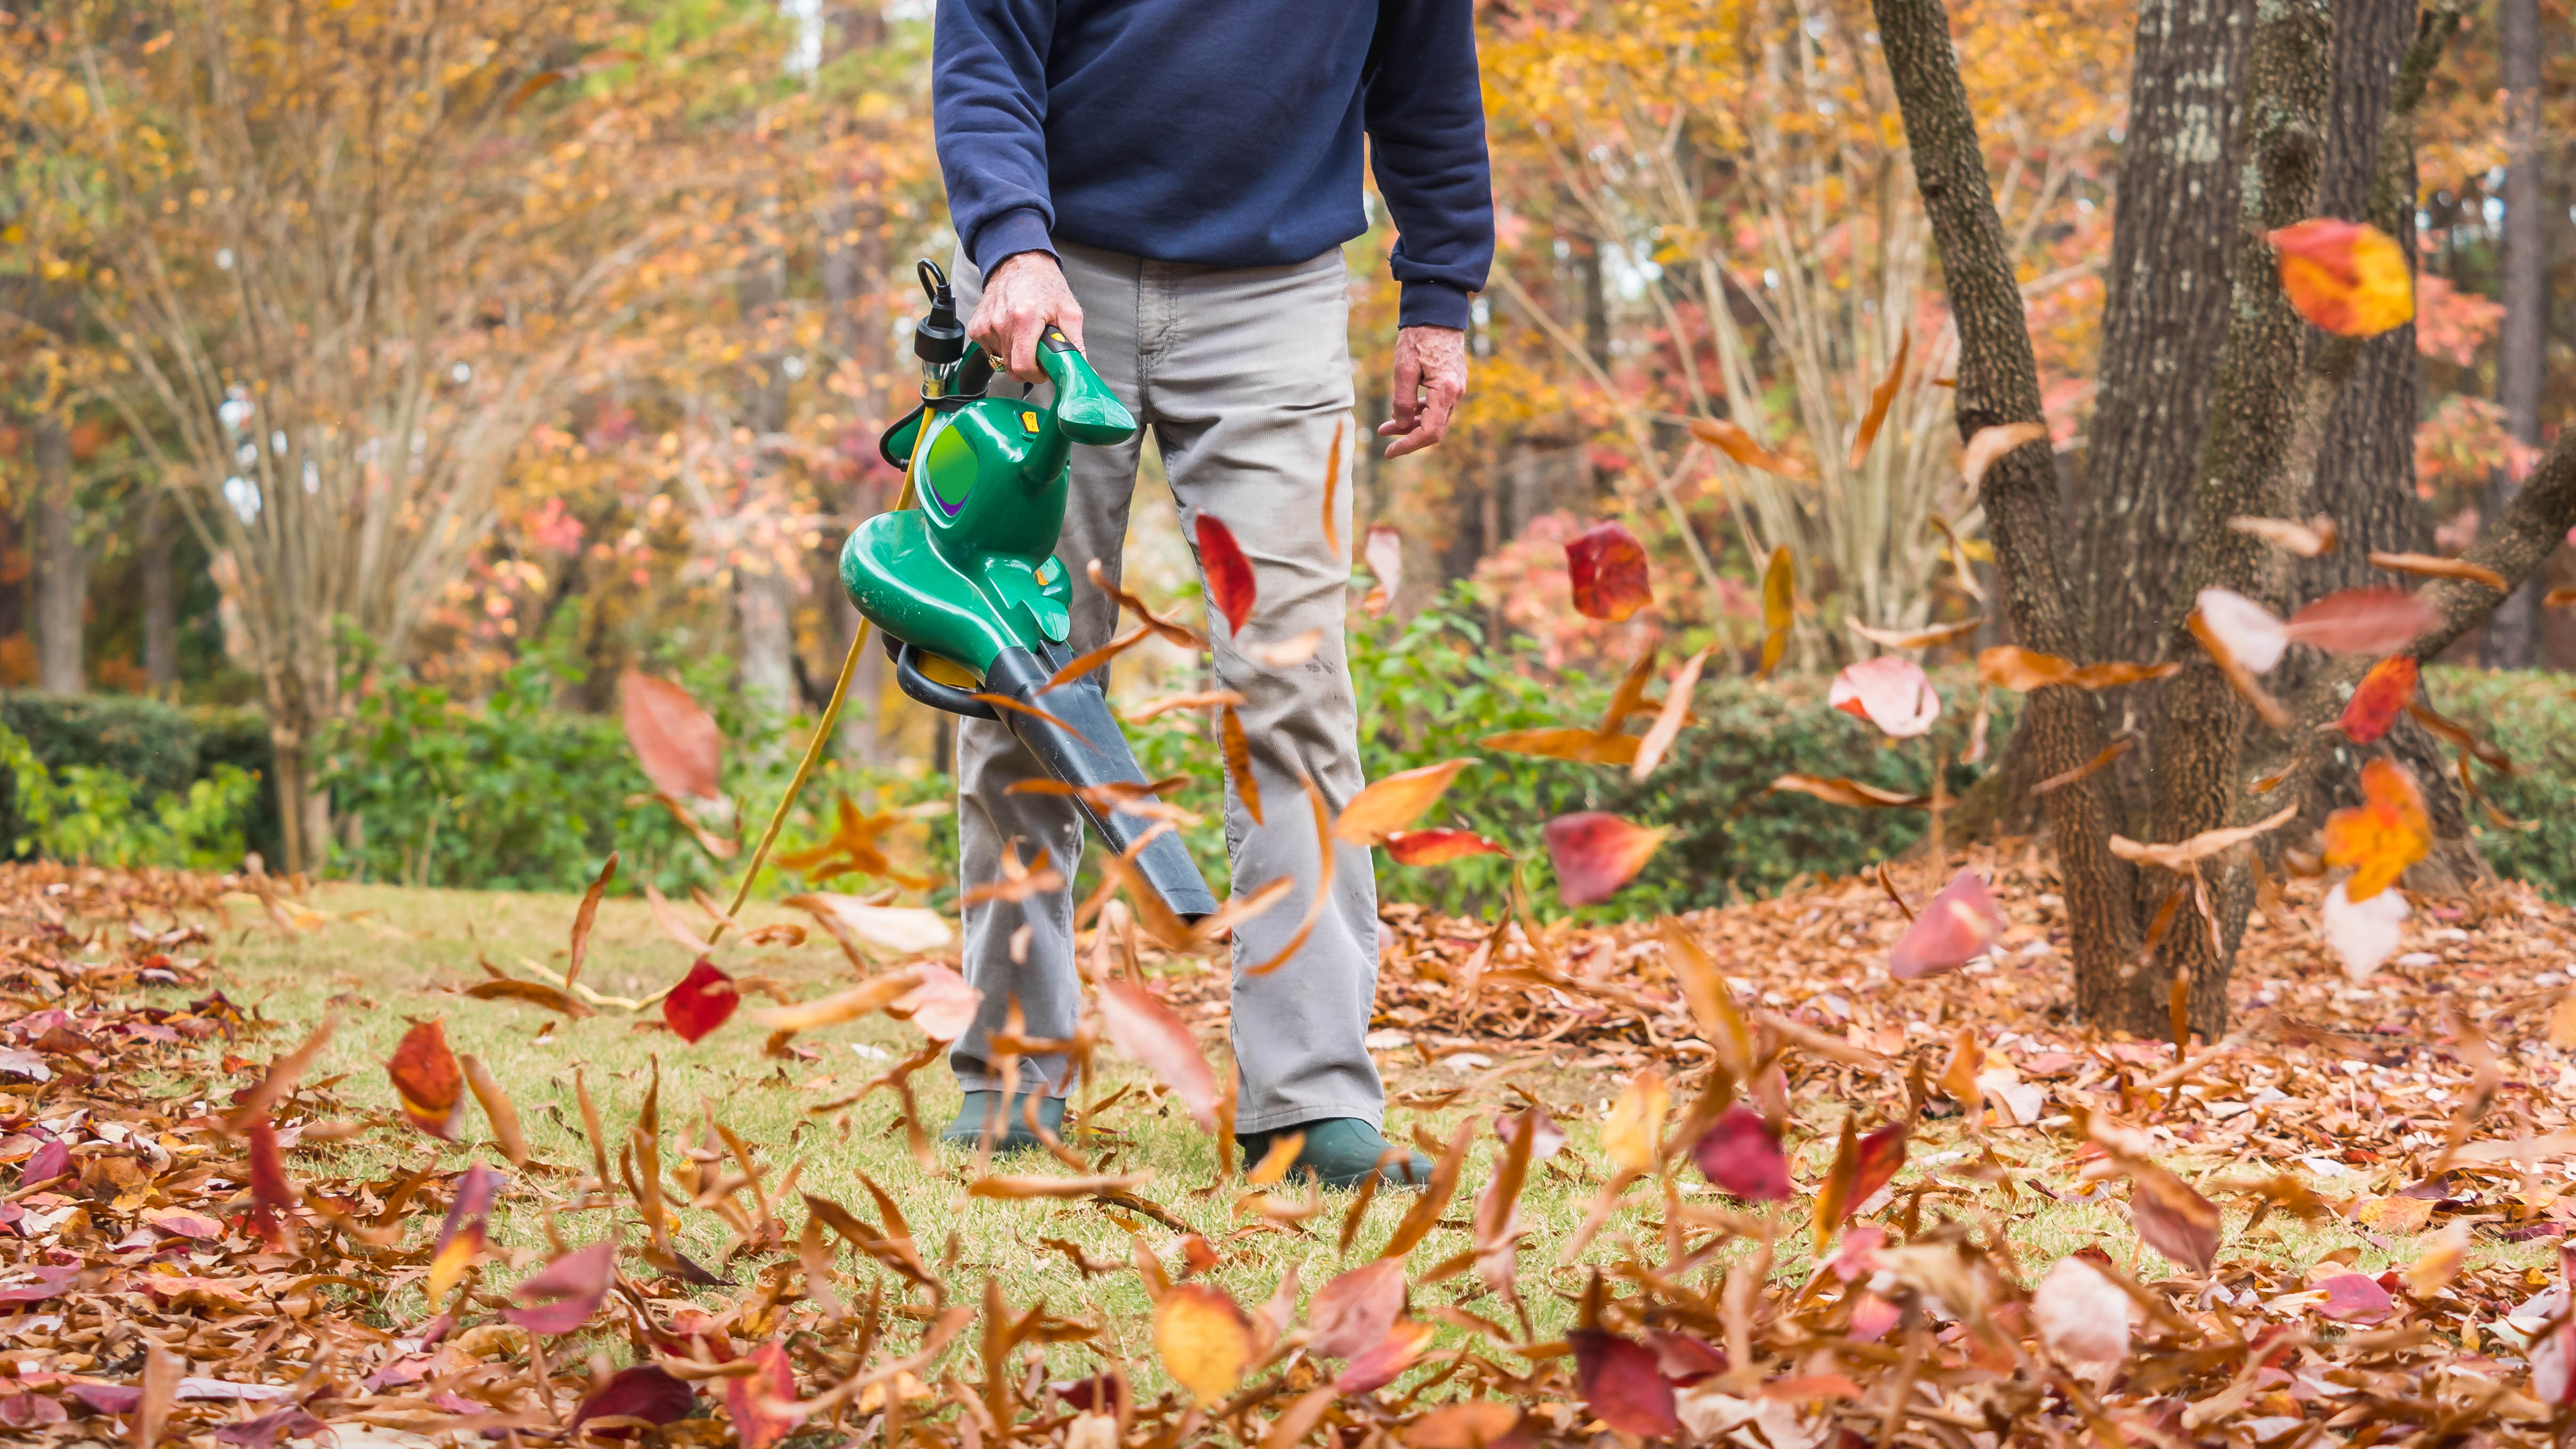 Man using electric powered leaf blower to blow autumn leaves from grass lawn. Landscape worker clearing fall leaves from residential yard.